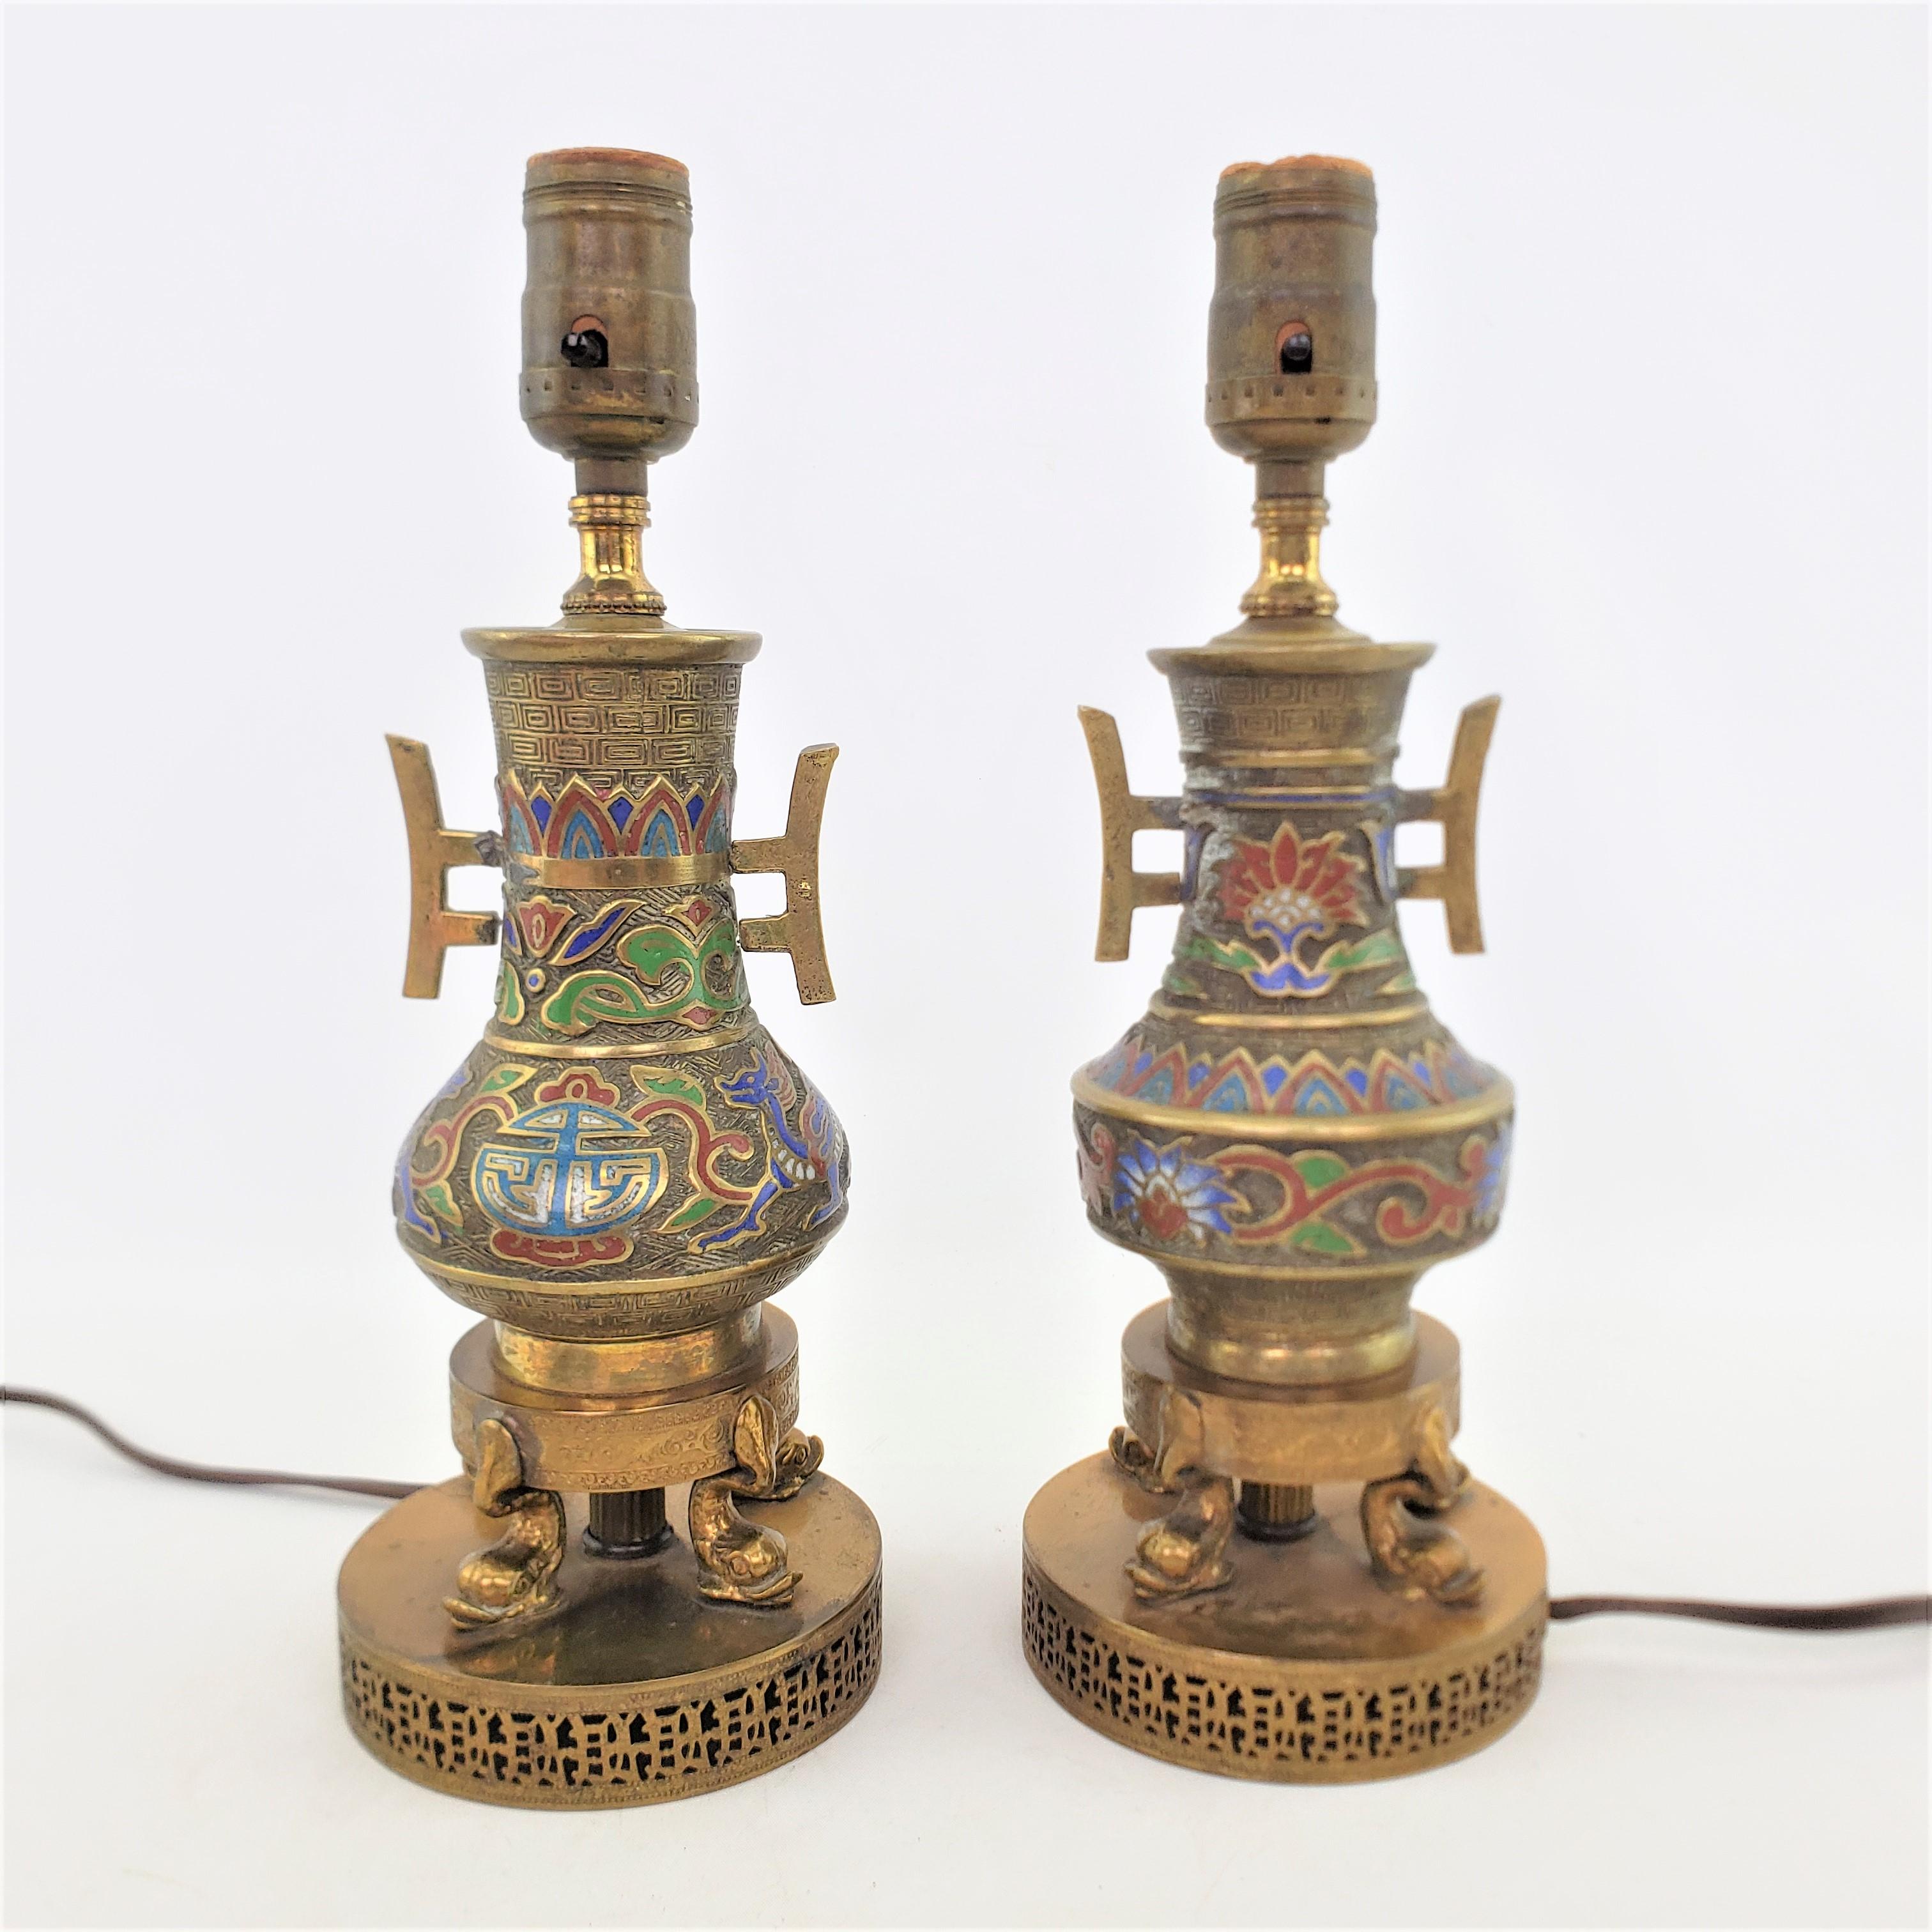 This pair of unmatched antique lamps are unsigned, but presumed to have originated from Japan and date to approximately 1920 and done in an Anglo-Japanese style. These small accent or 'boudoir' lamps may have once been vases, and are composed of